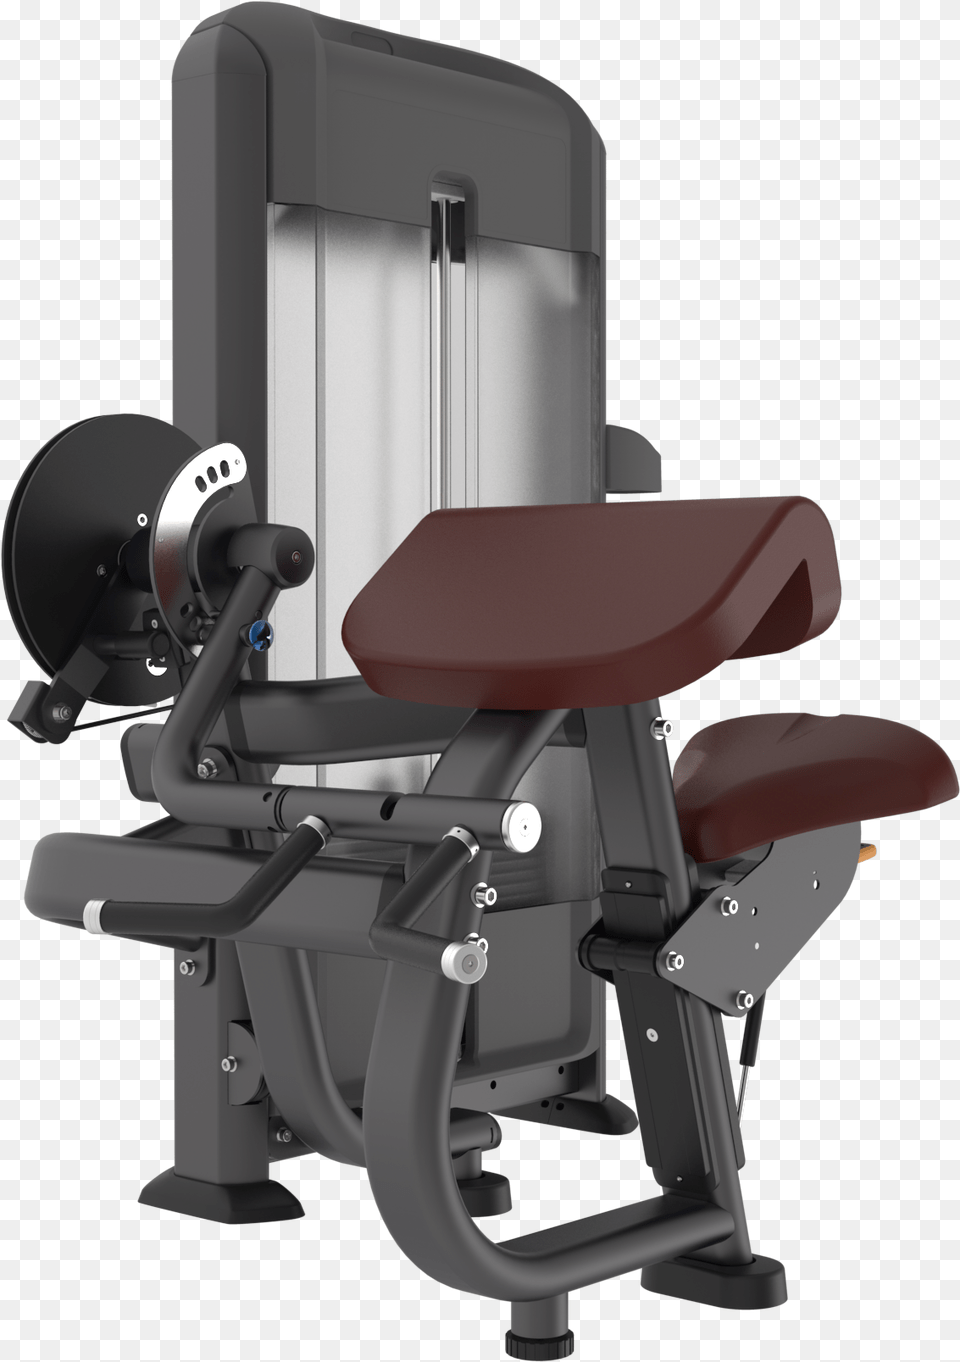 Power Fitness Chair, Cushion, Home Decor, Furniture, E-scooter Png